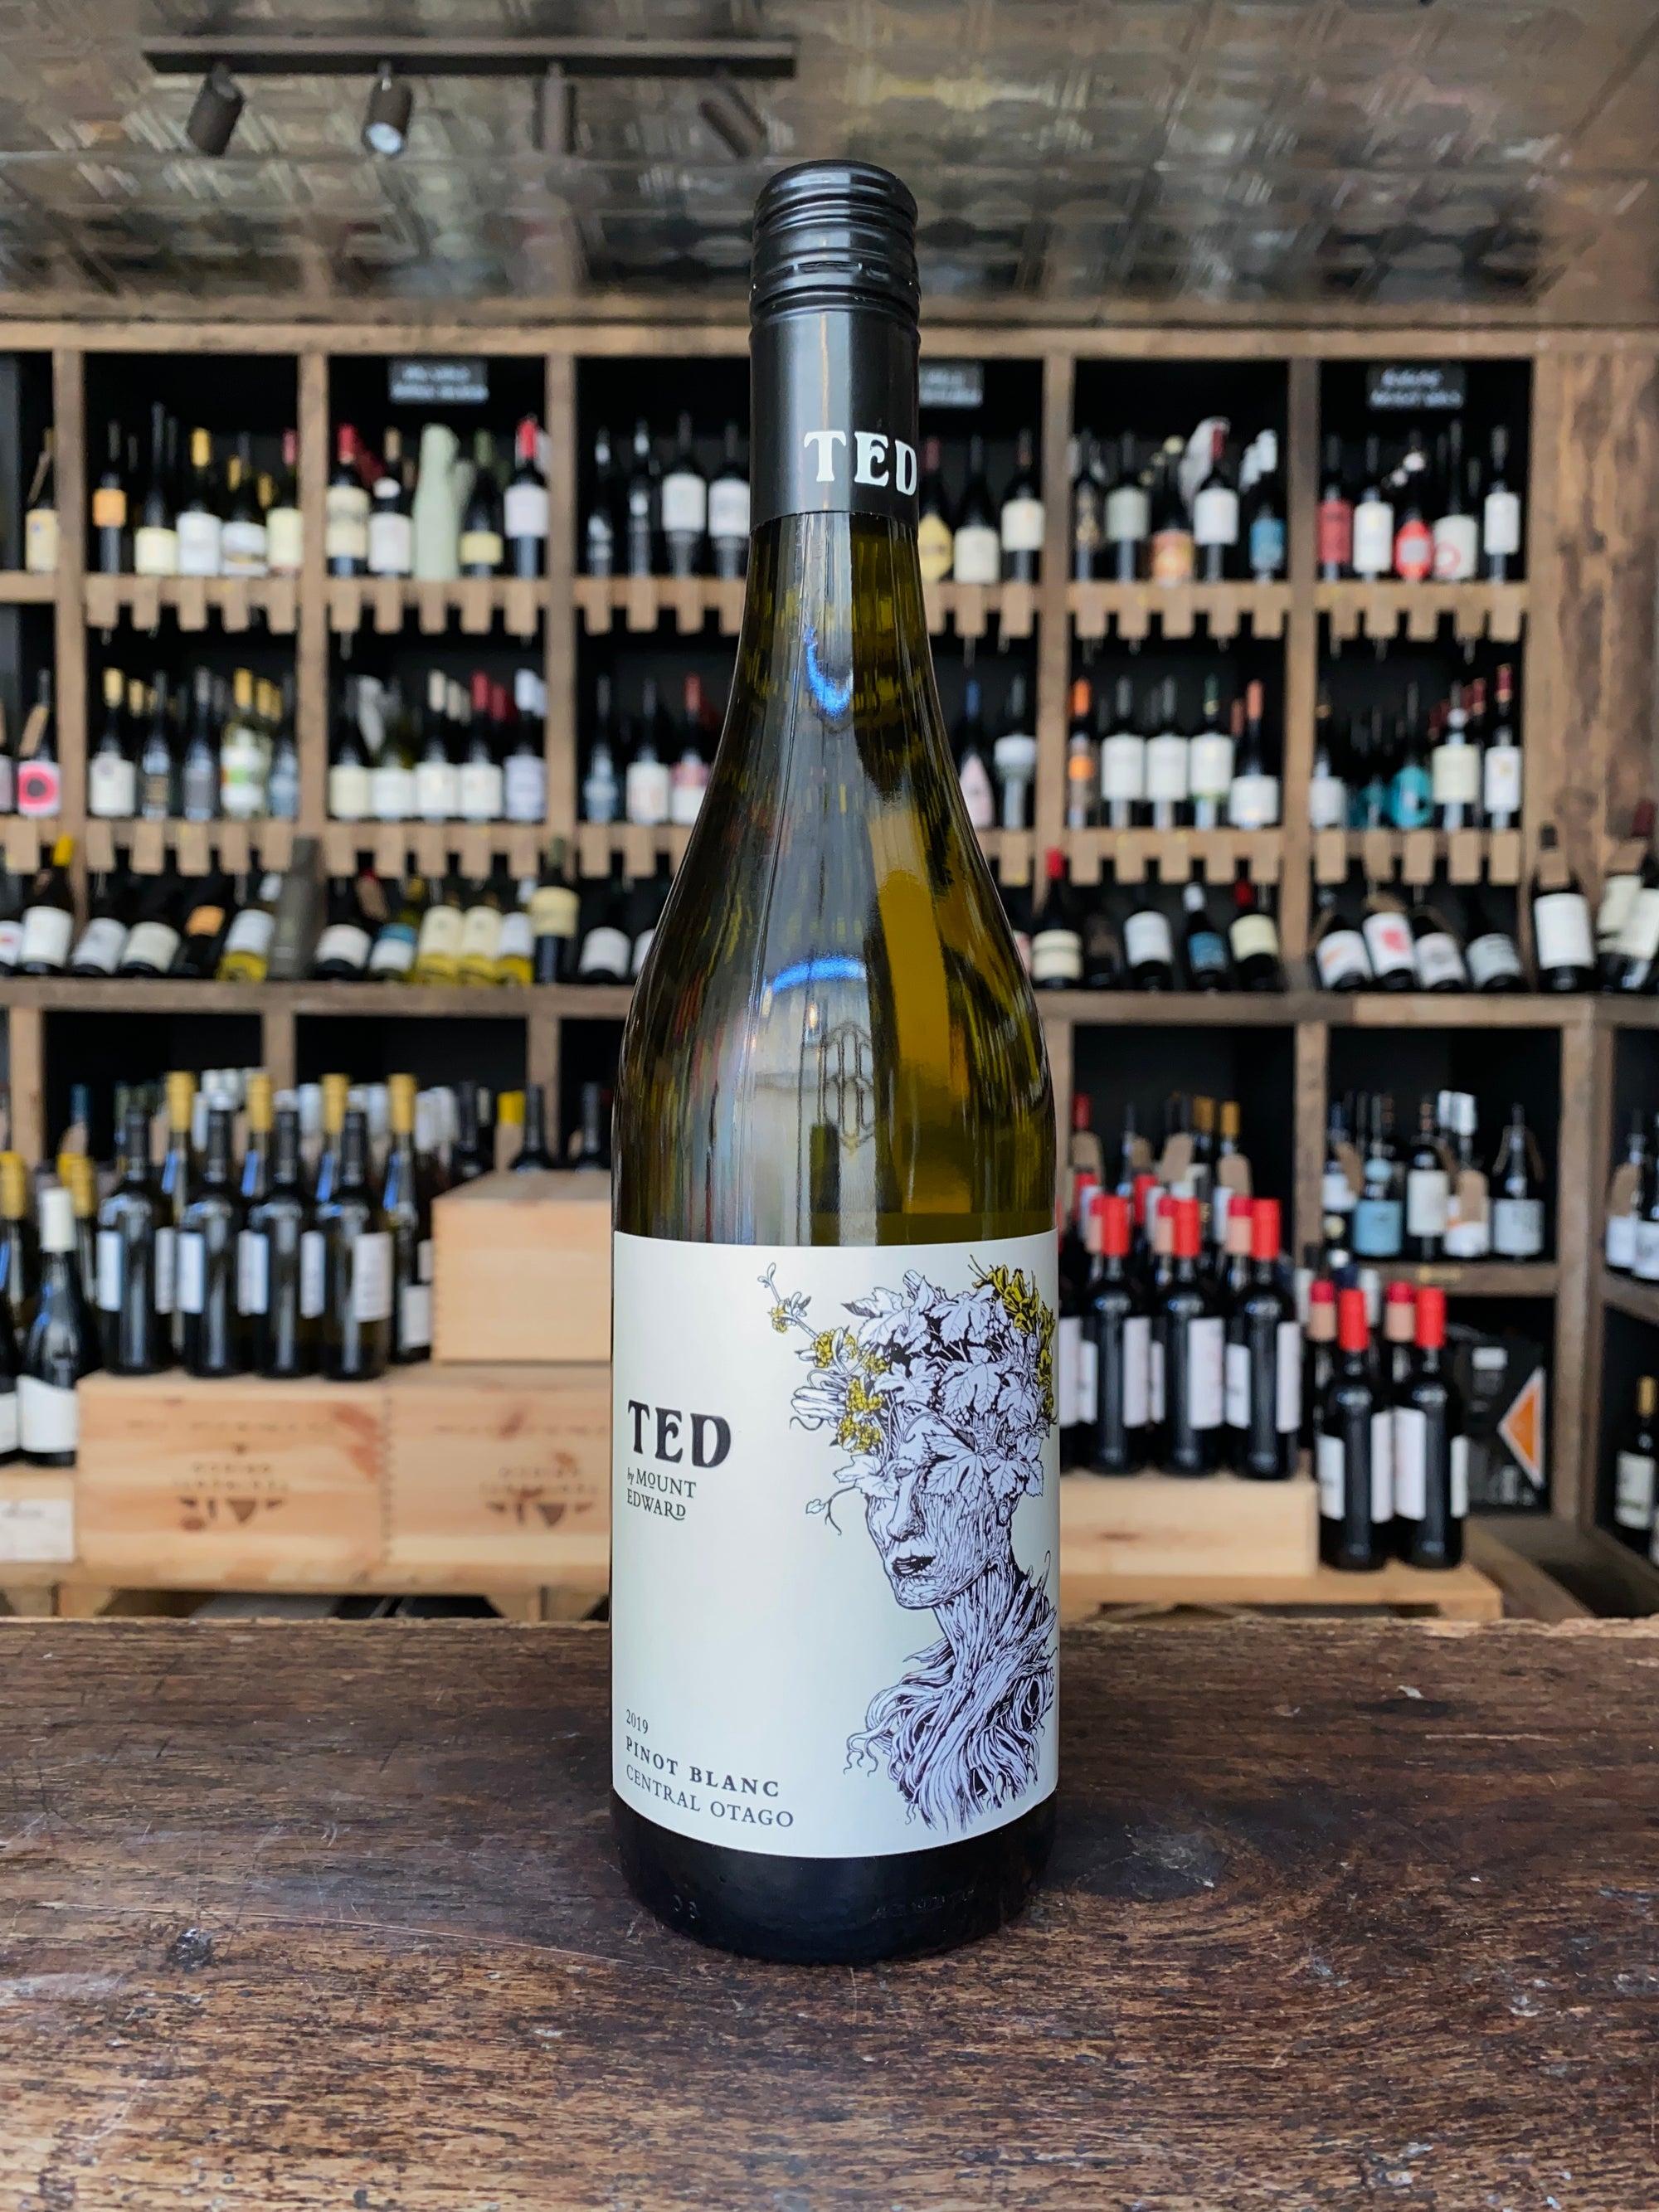 Ted Pinot Blanc, Mount Edward, Central Otago